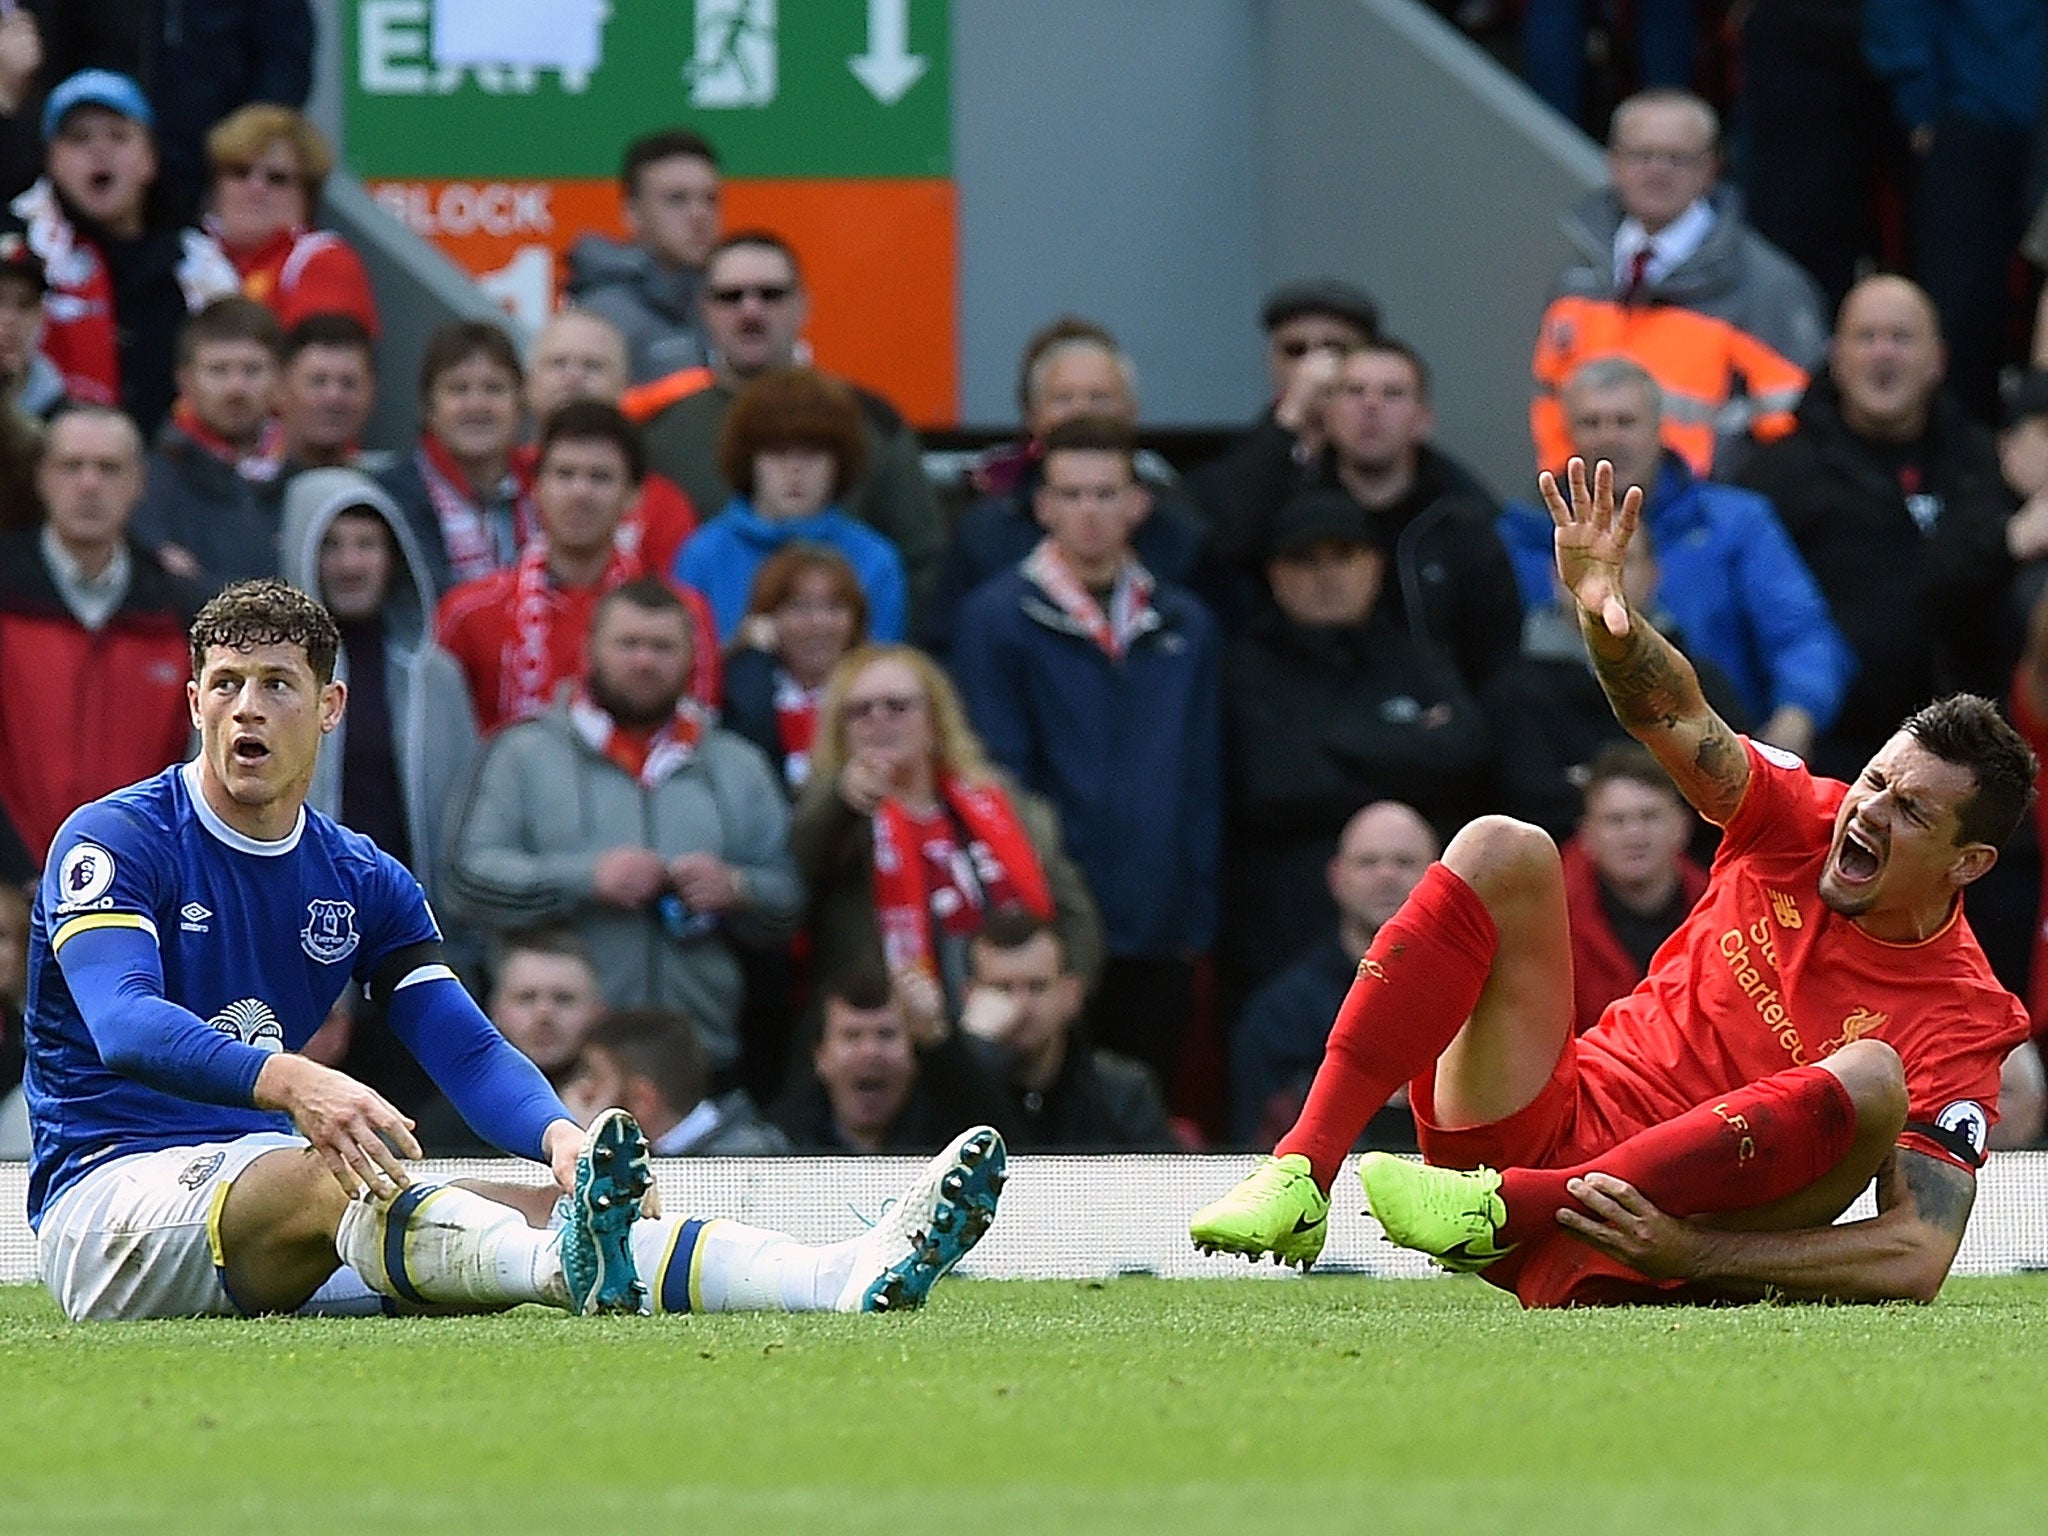 Ross Barkley let his emotions get the better of him as Everton suffered a 3-1 defeat in the Merseyside derby